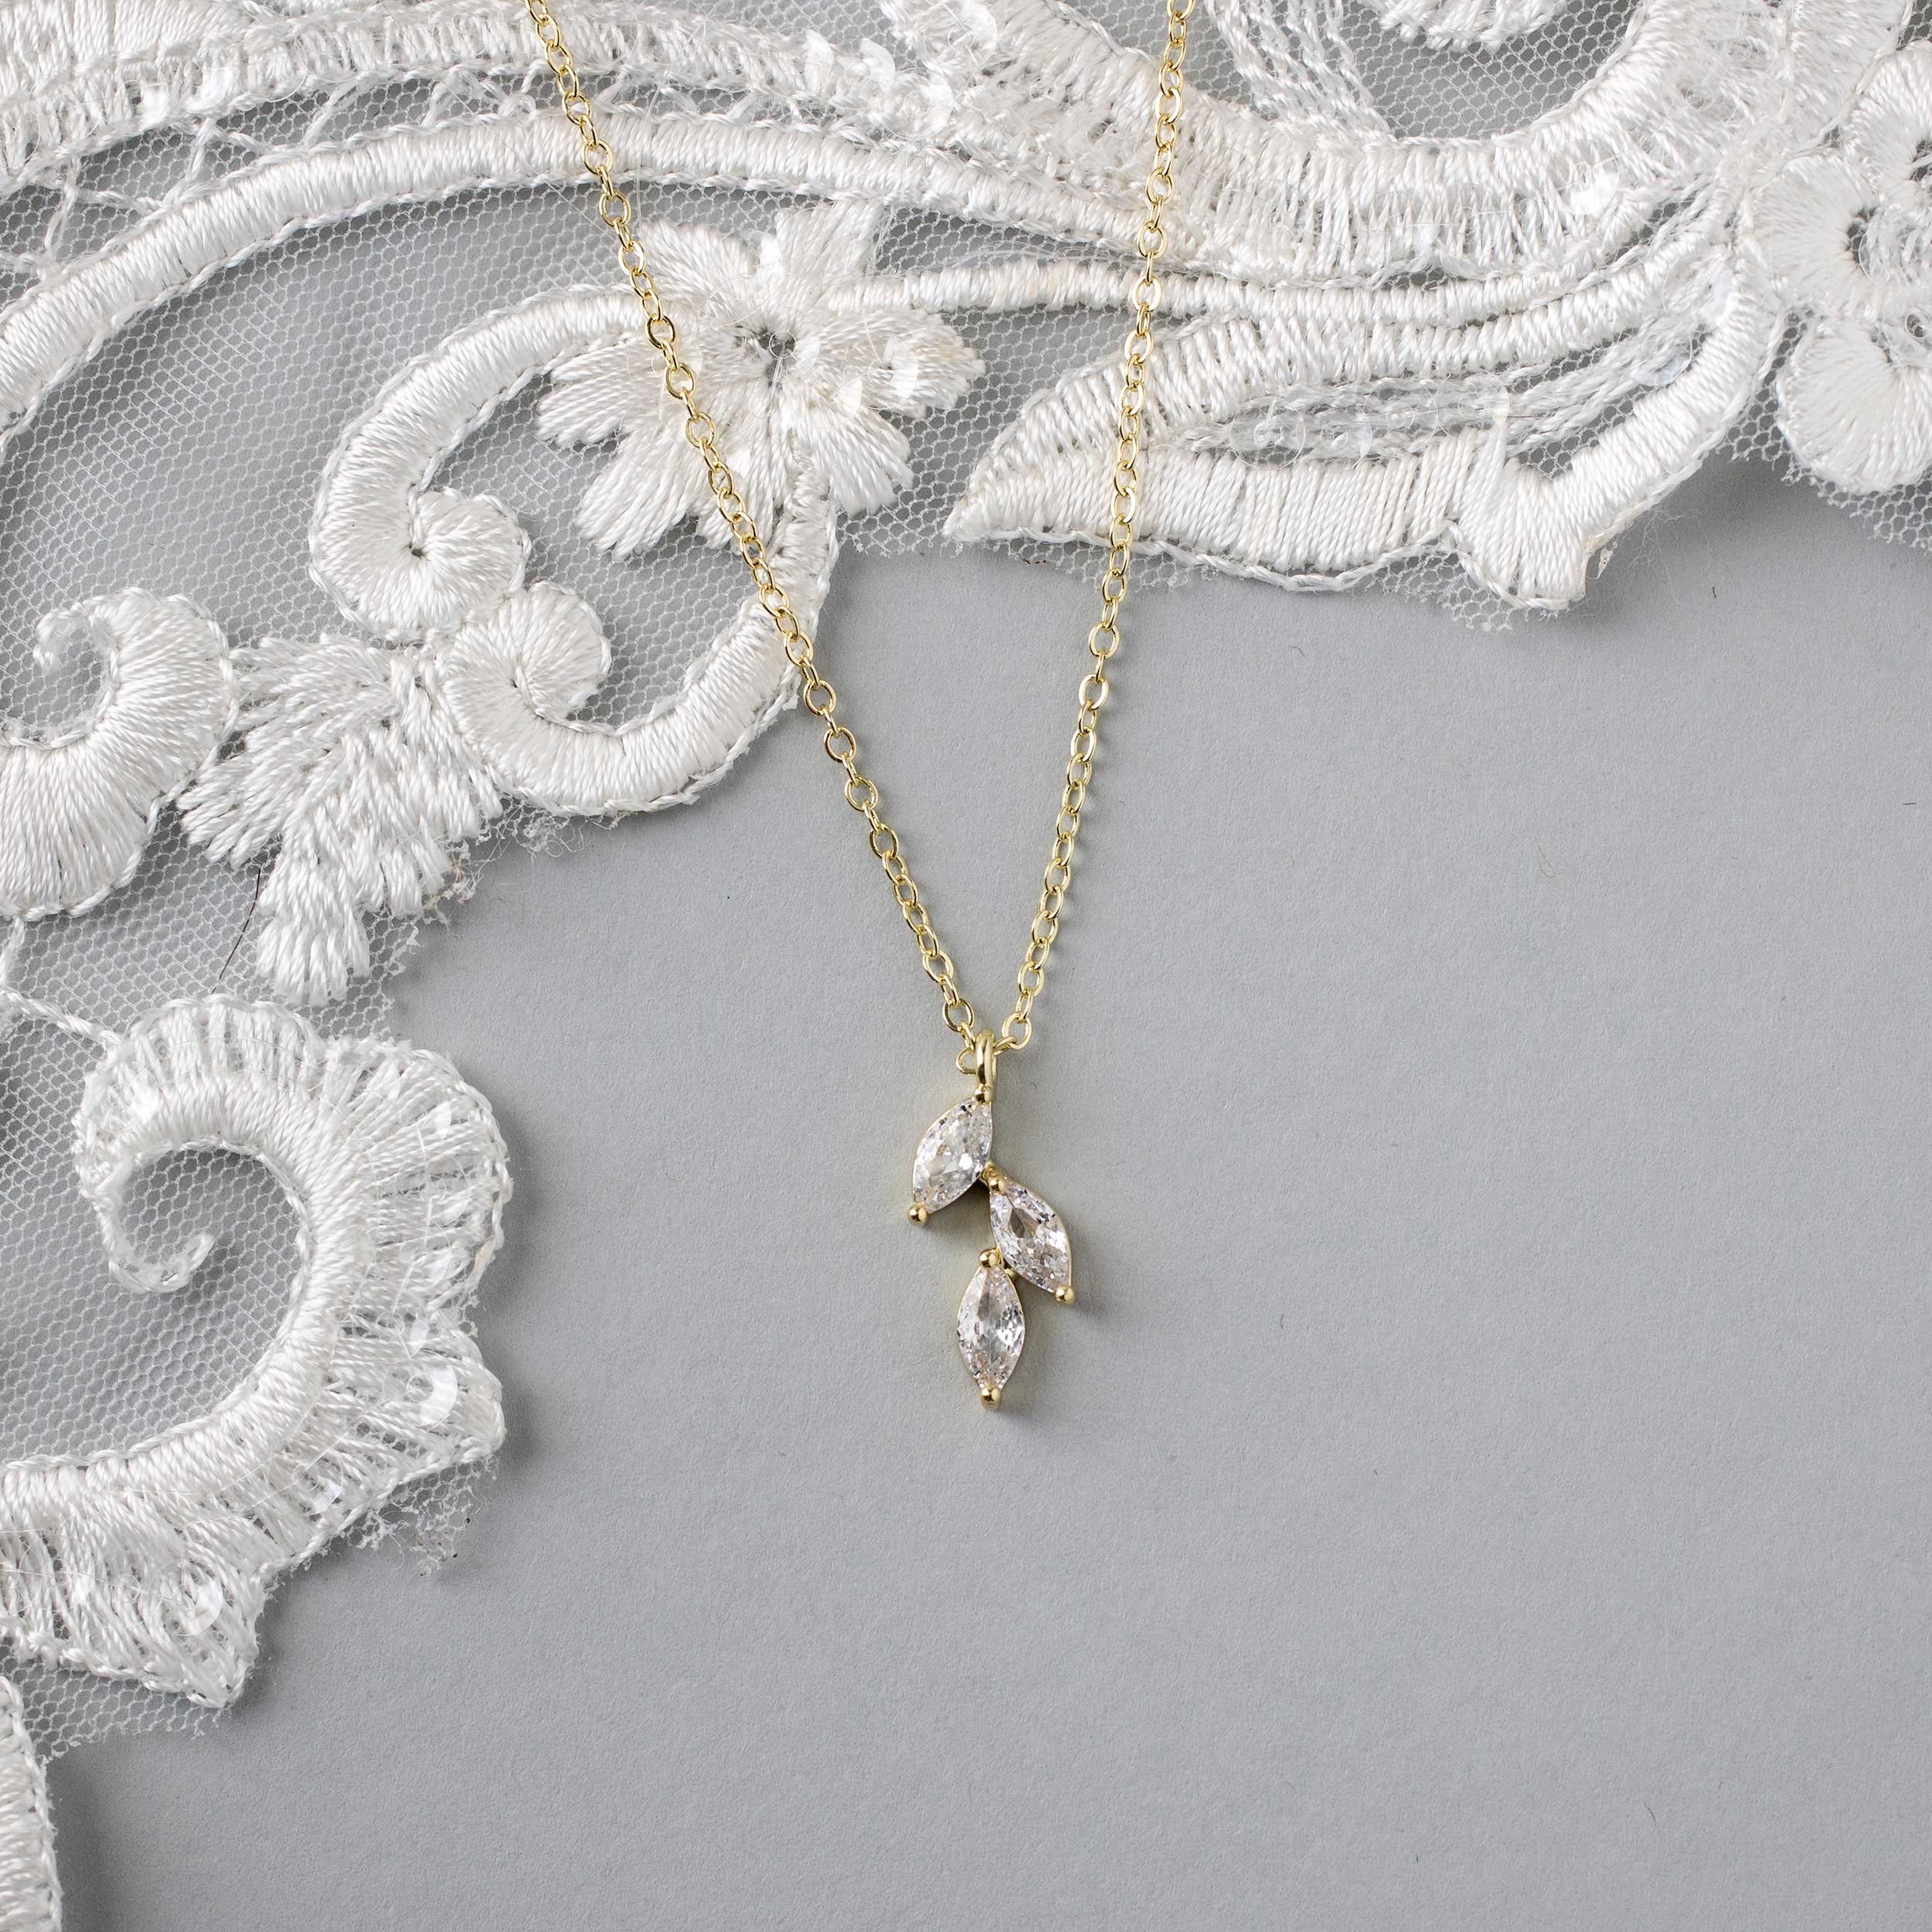 Rhinestone necklace - Silver-coloured - Ladies | H&M IN